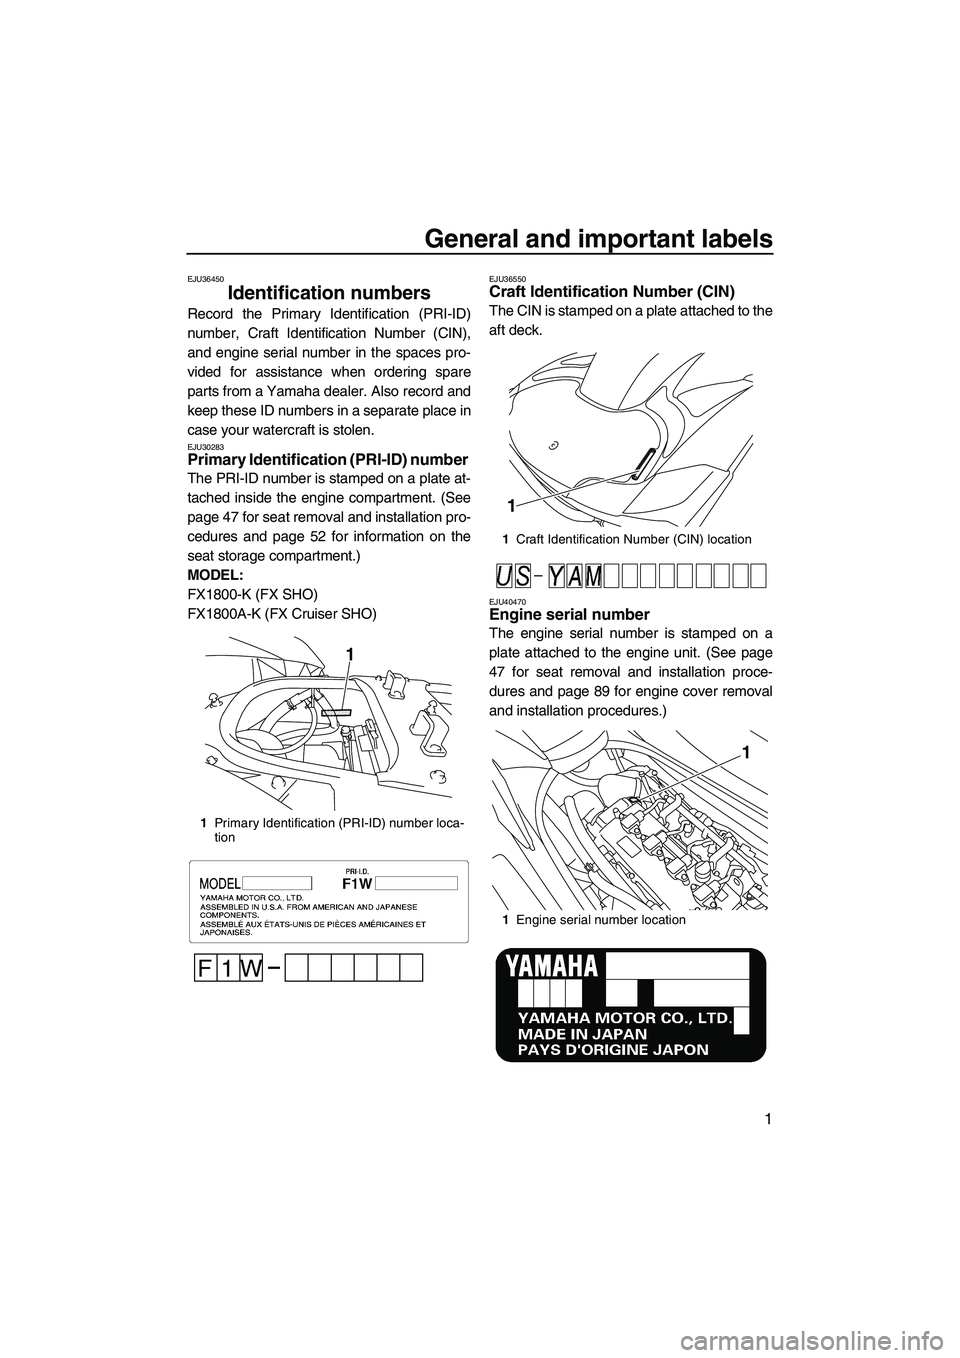 YAMAHA SVHO CRUISER 2011  Owners Manual General and important labels
1
EJU36450
Identification numbers 
Record the Primary Identification (PRI-ID)
number, Craft Identification Number (CIN),
and engine serial number in the spaces pro-
vided 